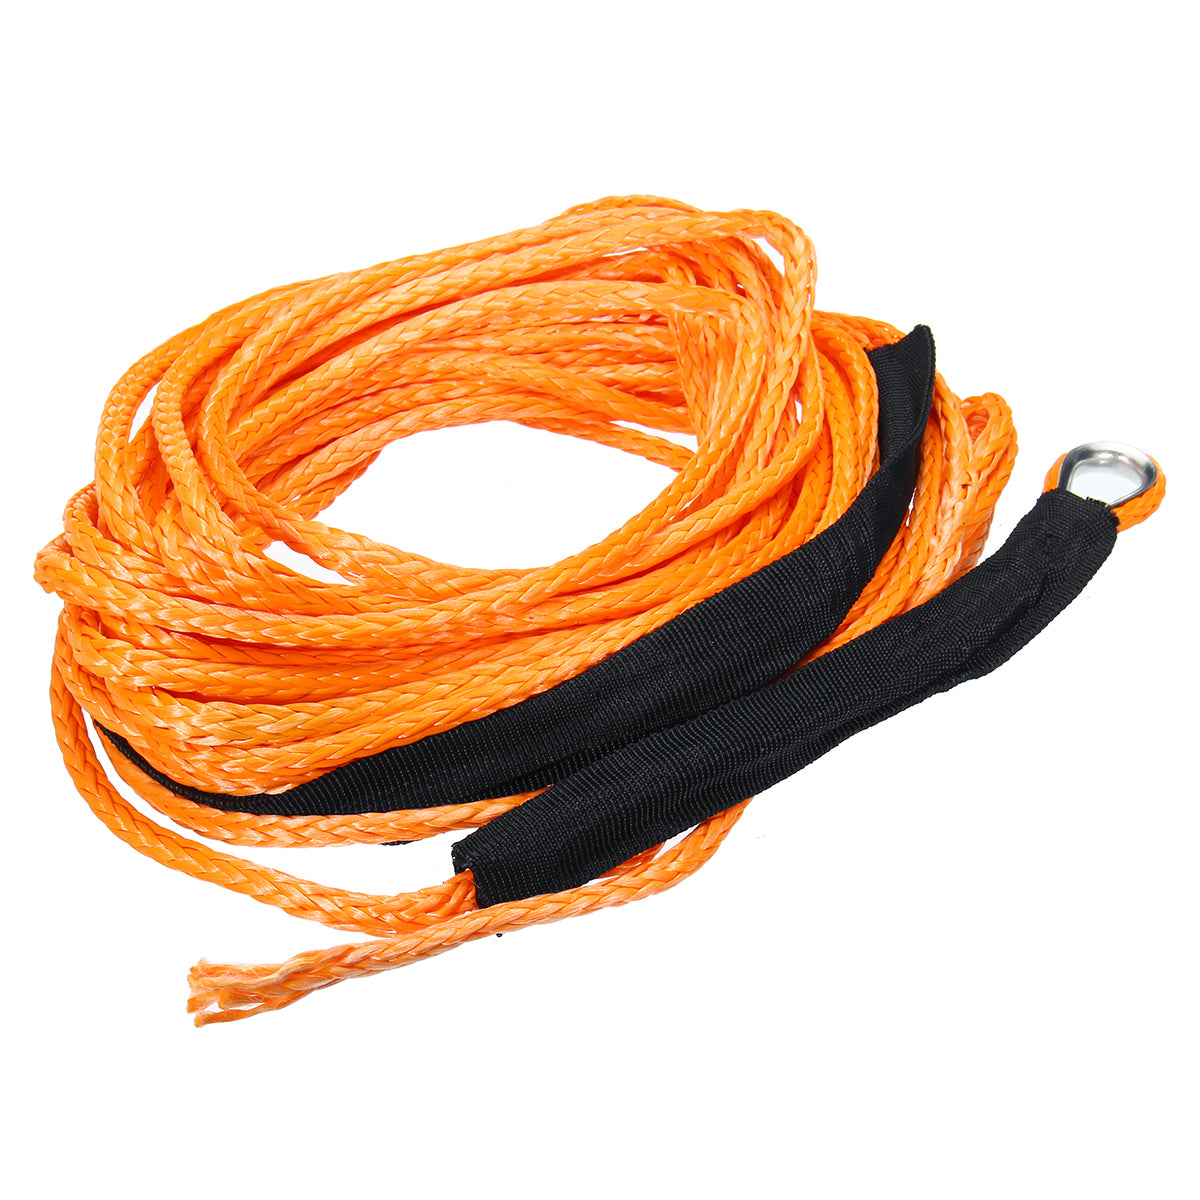 Dark Orange 15m 5500LBs Winch Rope String Line Cable With Sheath Synthetic Towing Rope Car Wash Maintenance String For ATV UTV Off-Road Motorcycle